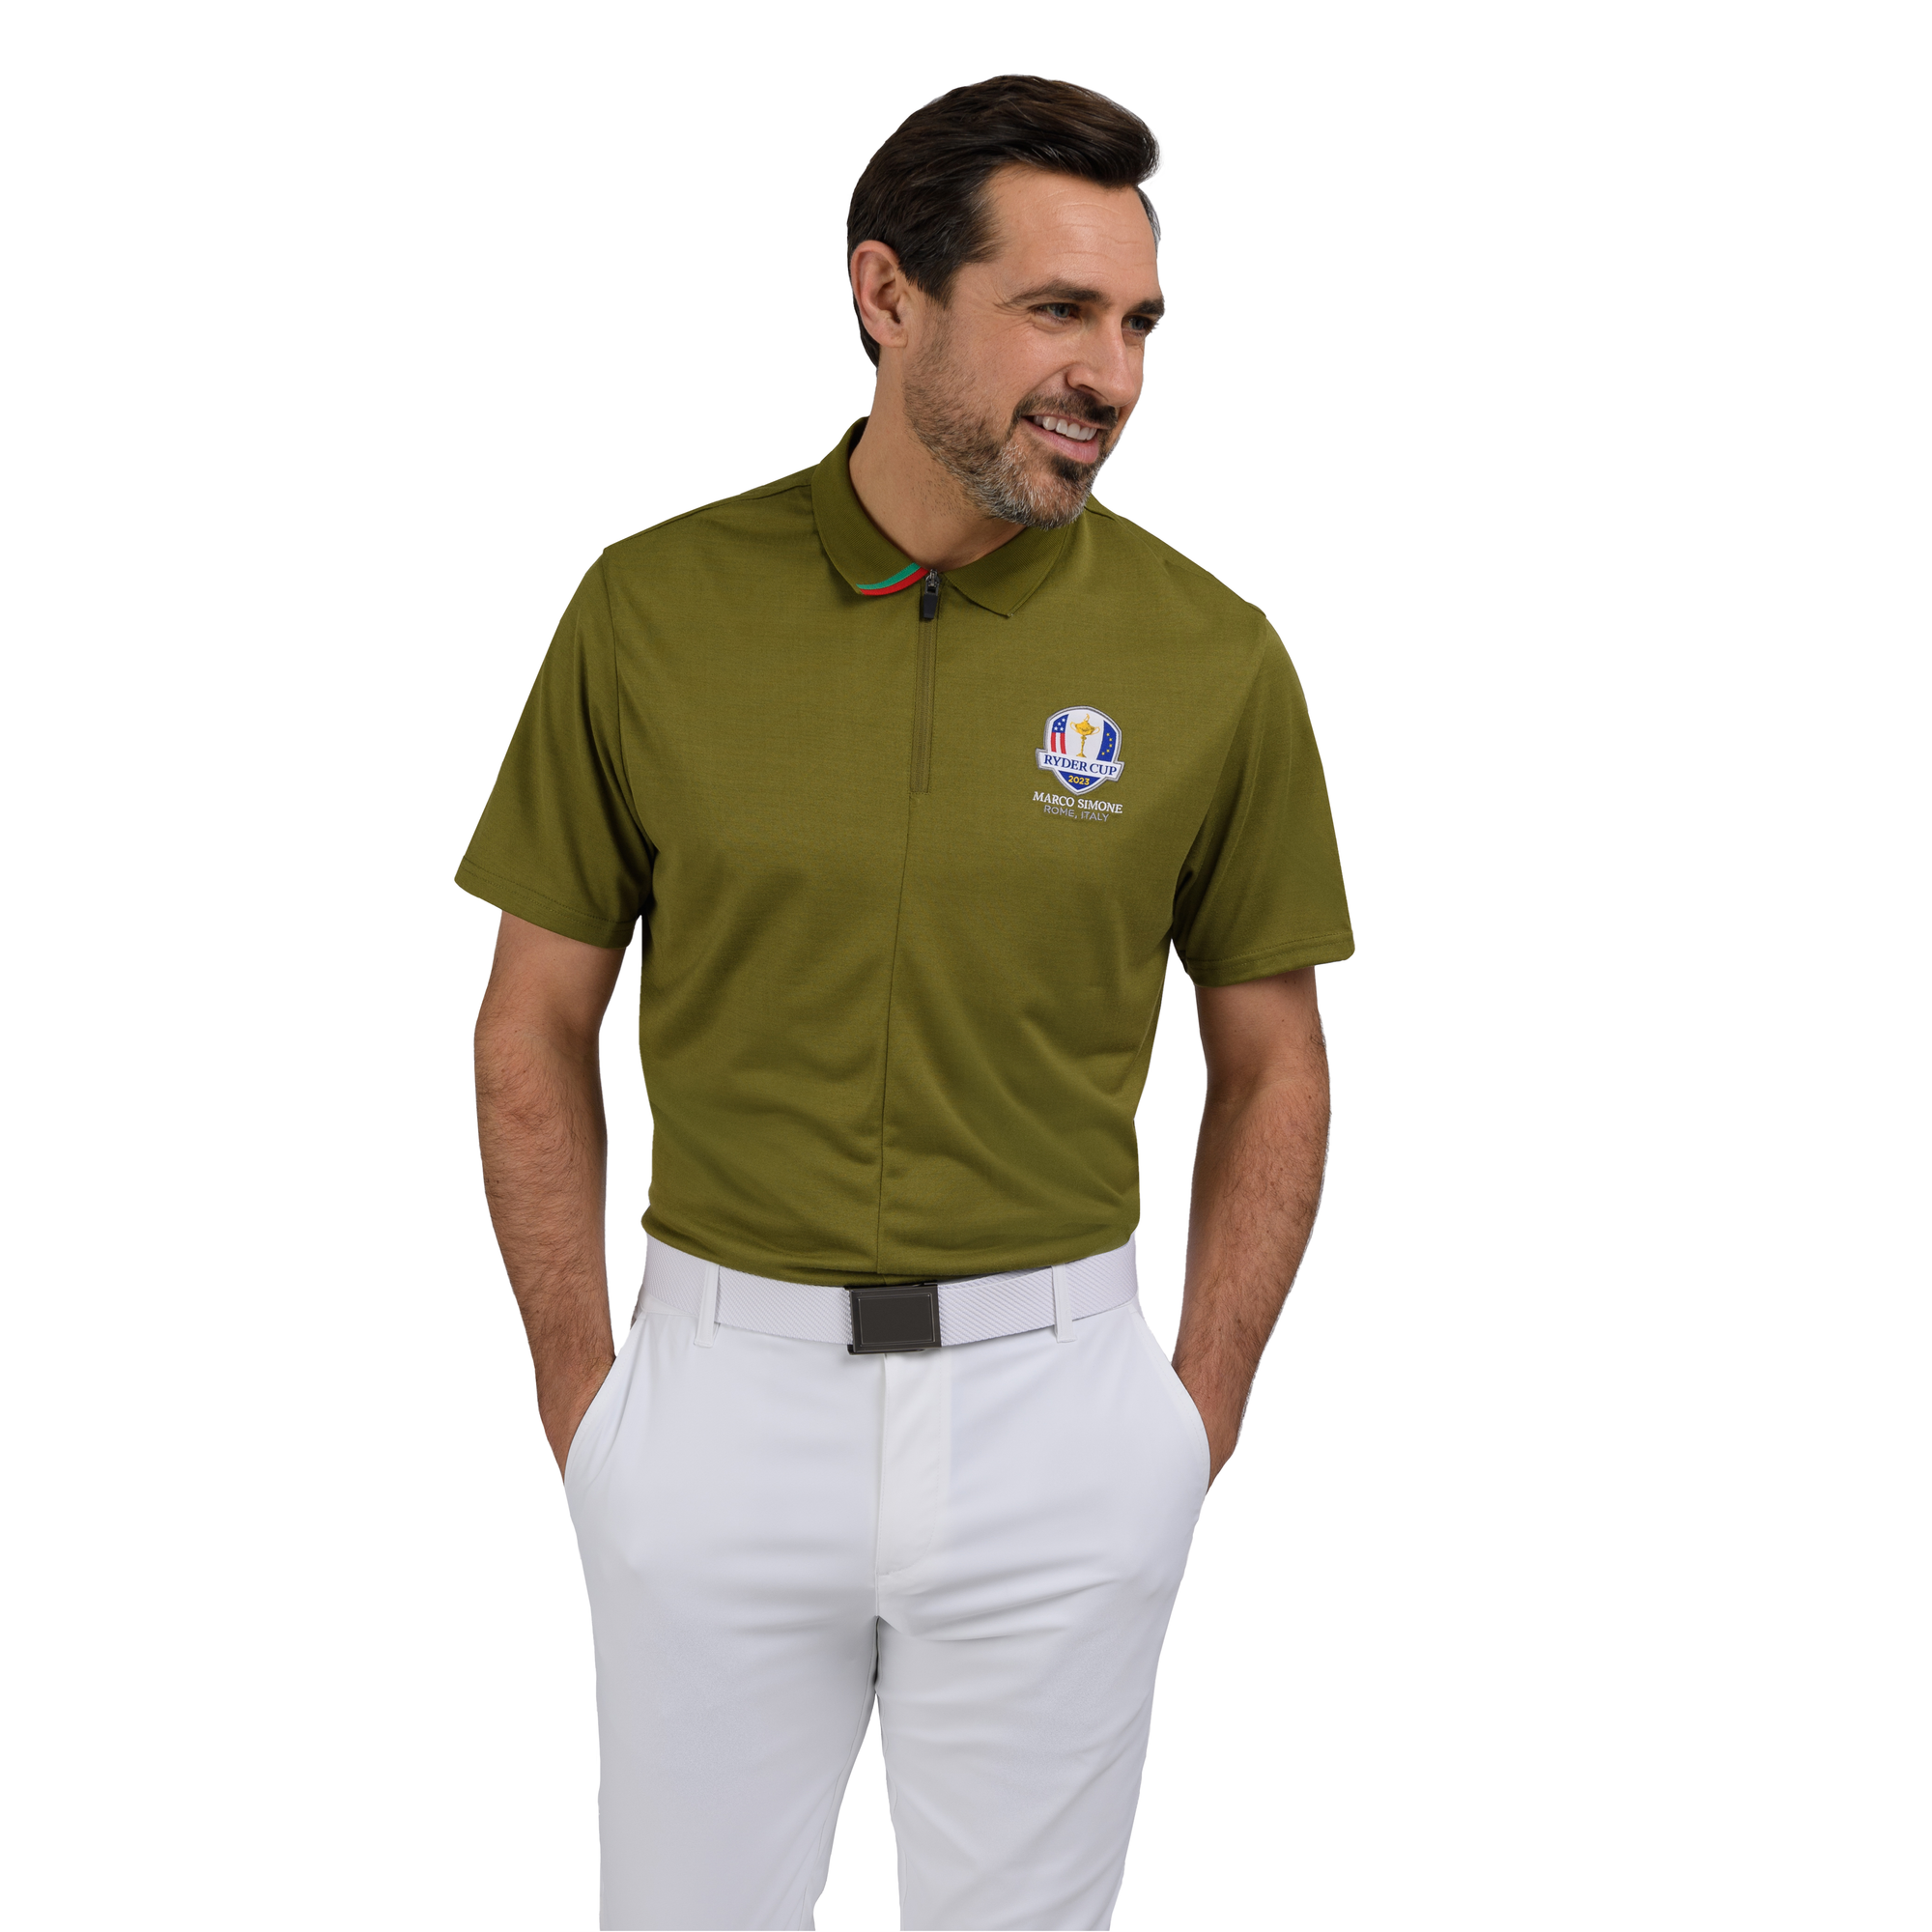 2023 Ryder Cup Rome Collection Men's Polo - Khaki - Front